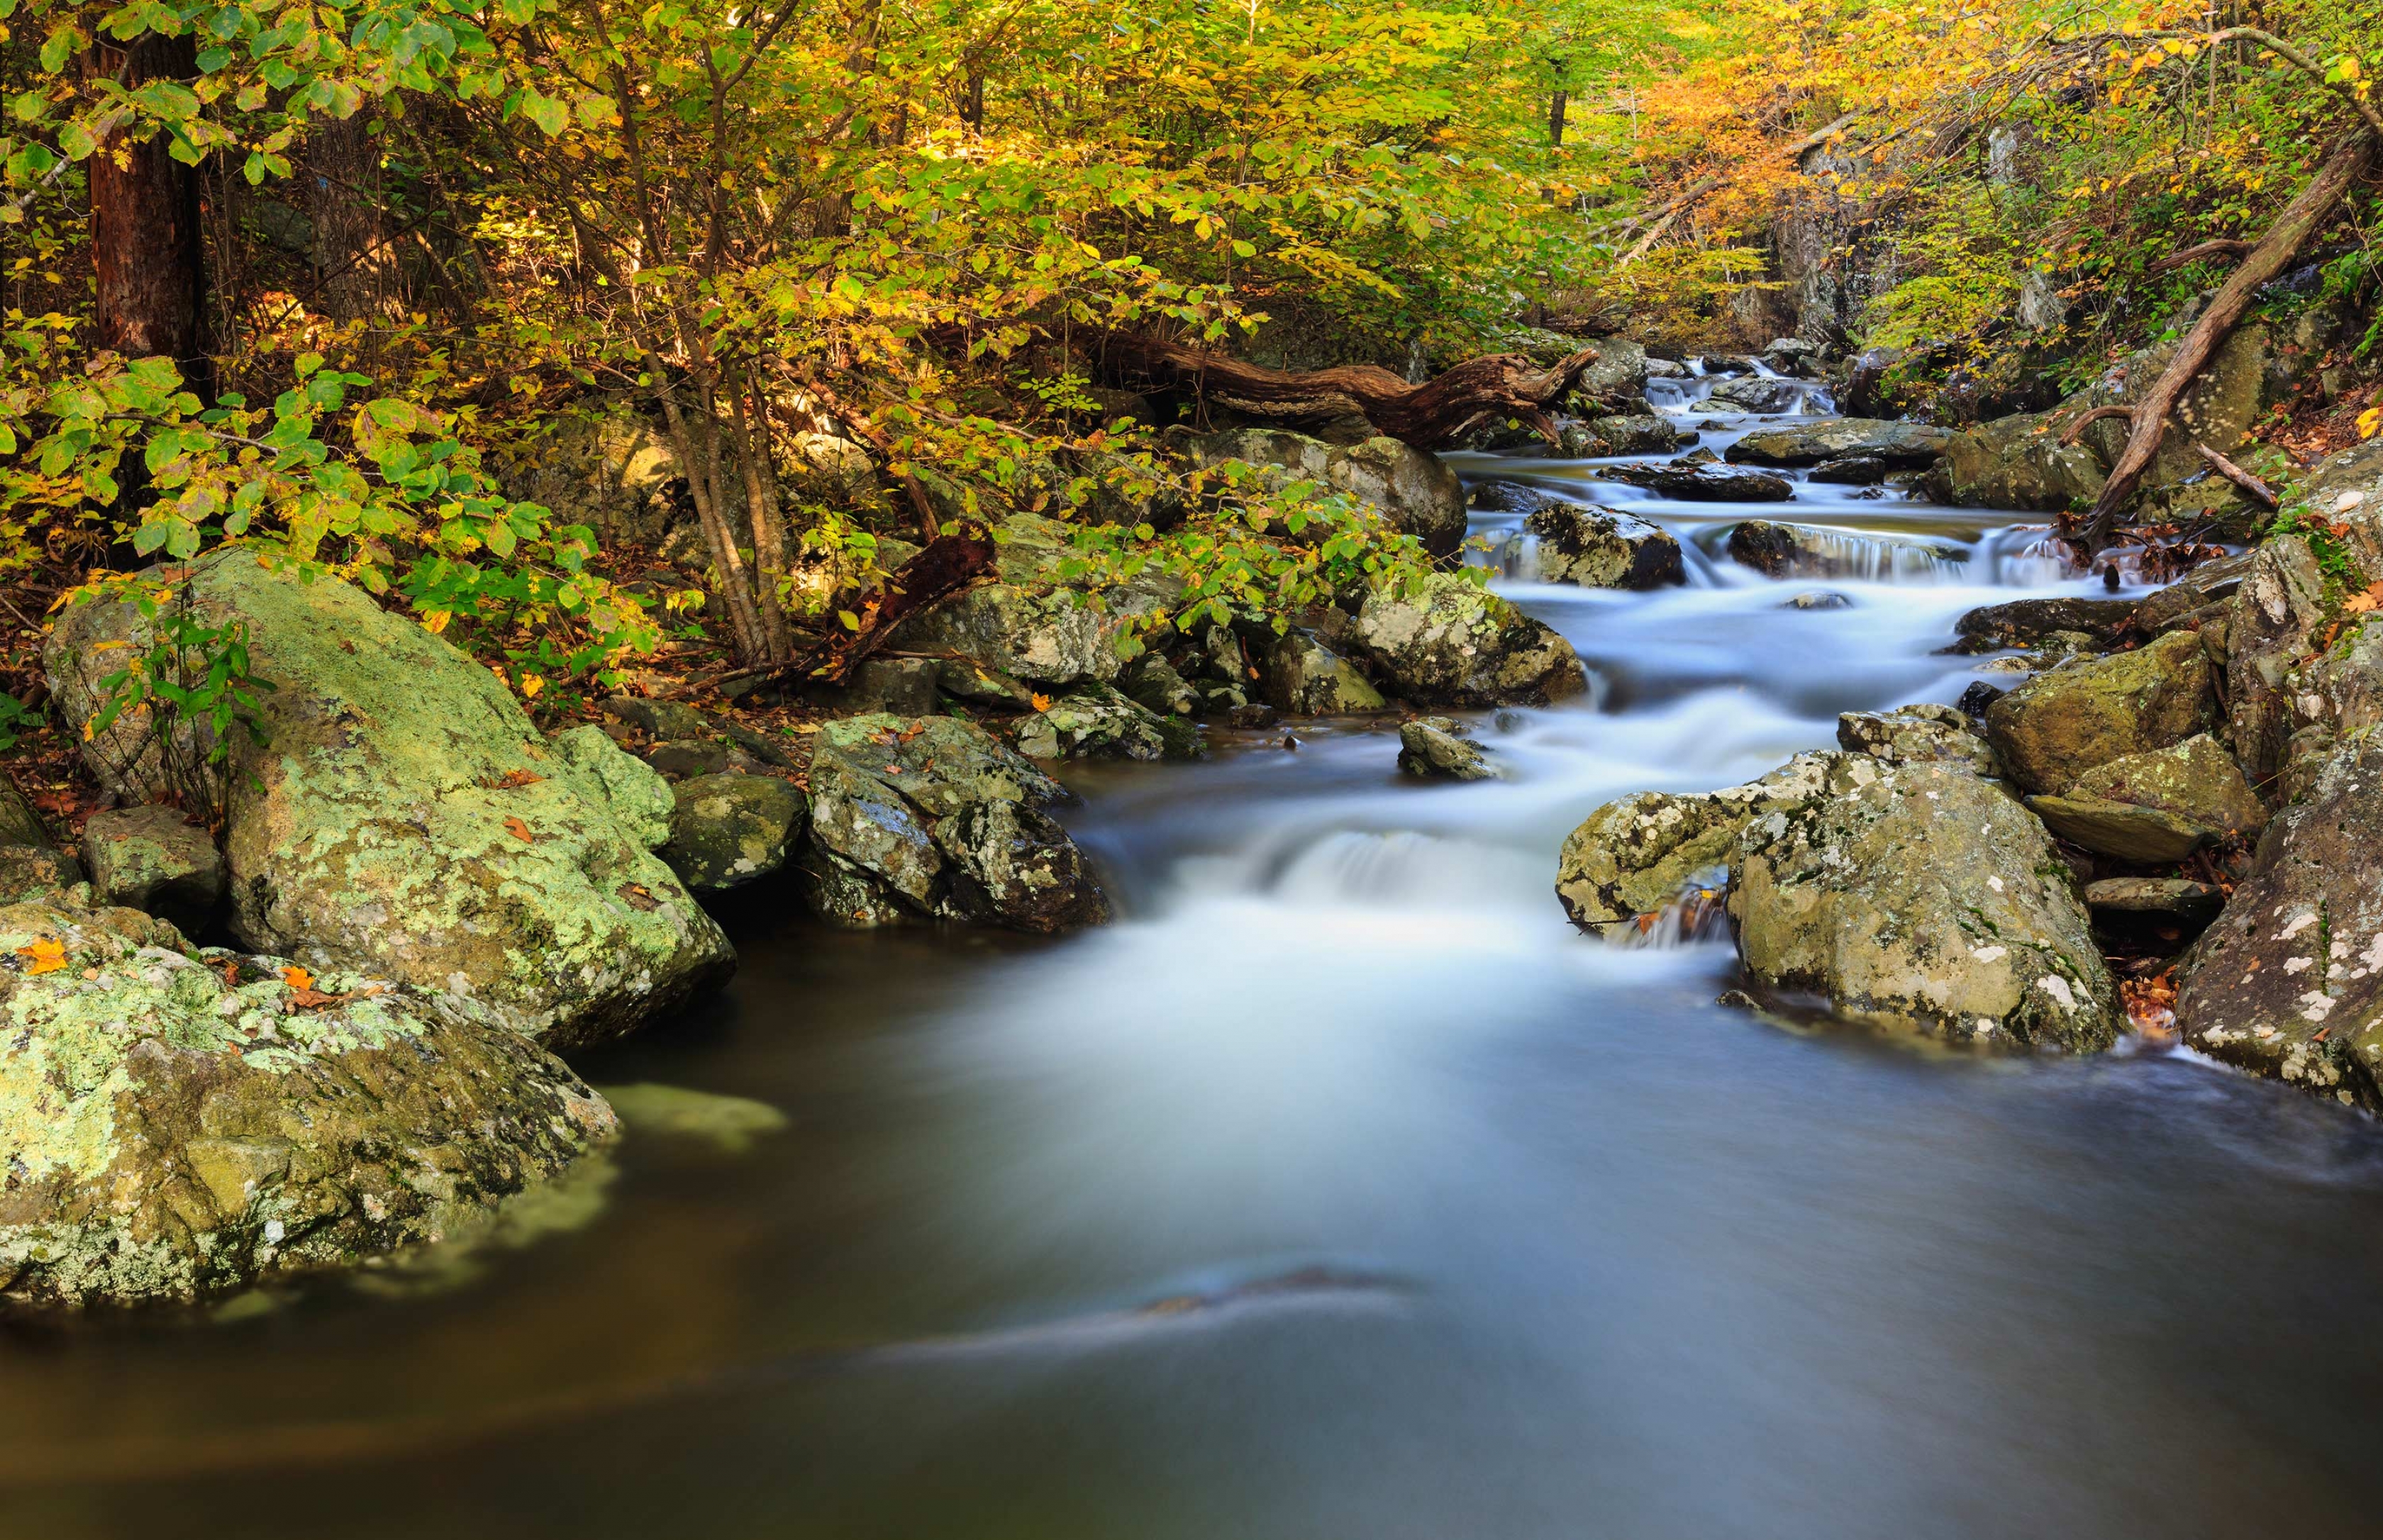 White Oak Canyon offers swimming in Shenandoah National Park.